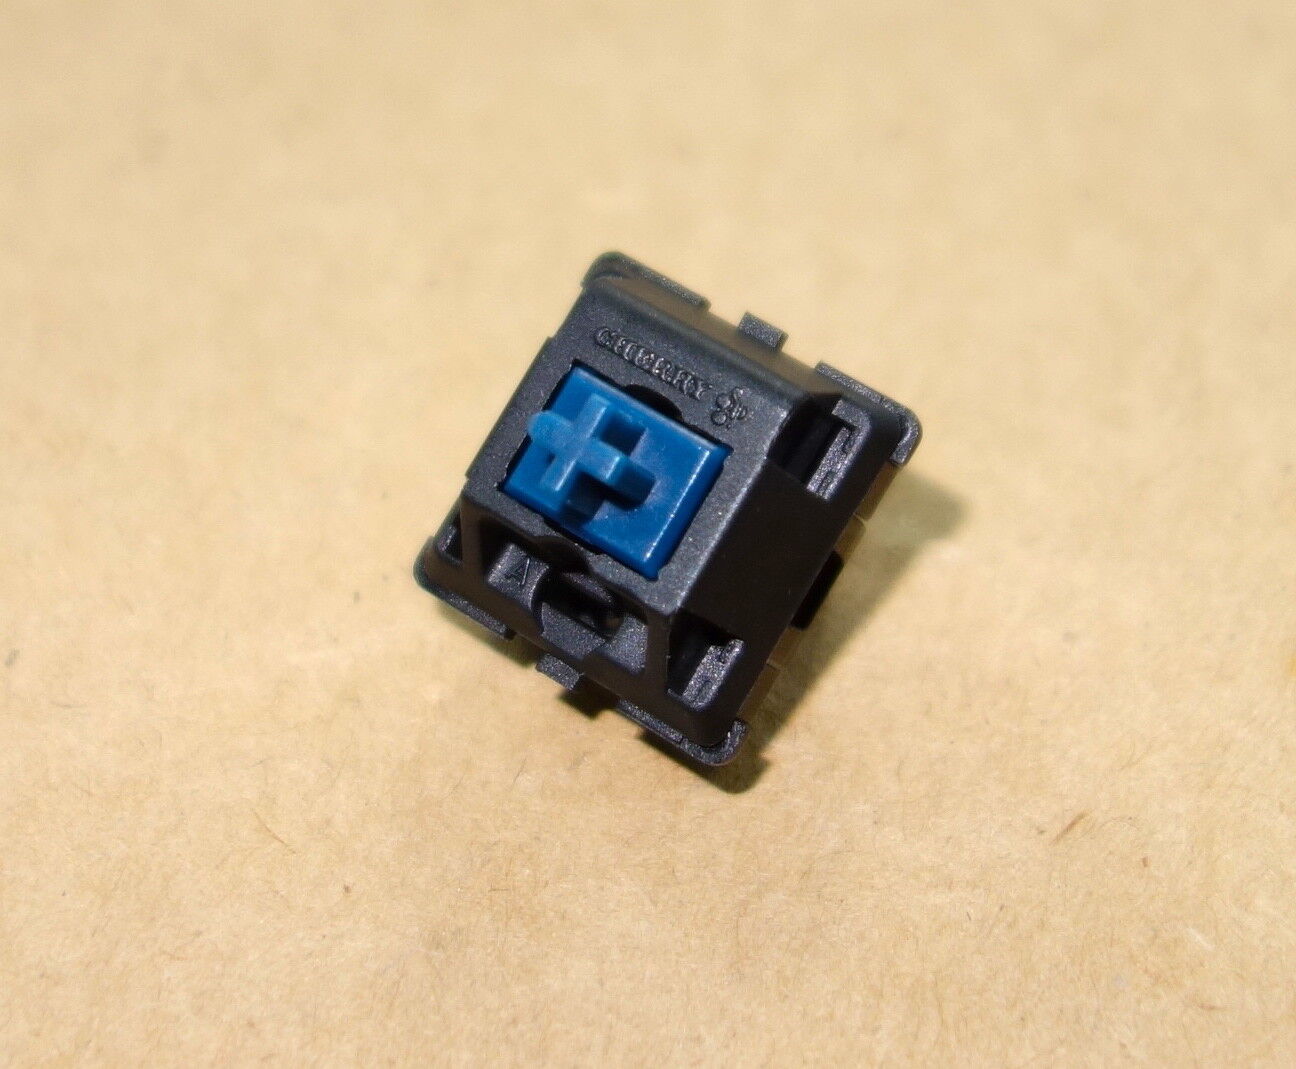 1x Cherry MX NAVY VINTAGE BLUE Clicky/Tactile Keyboard Switch - TESTED W O-Scope